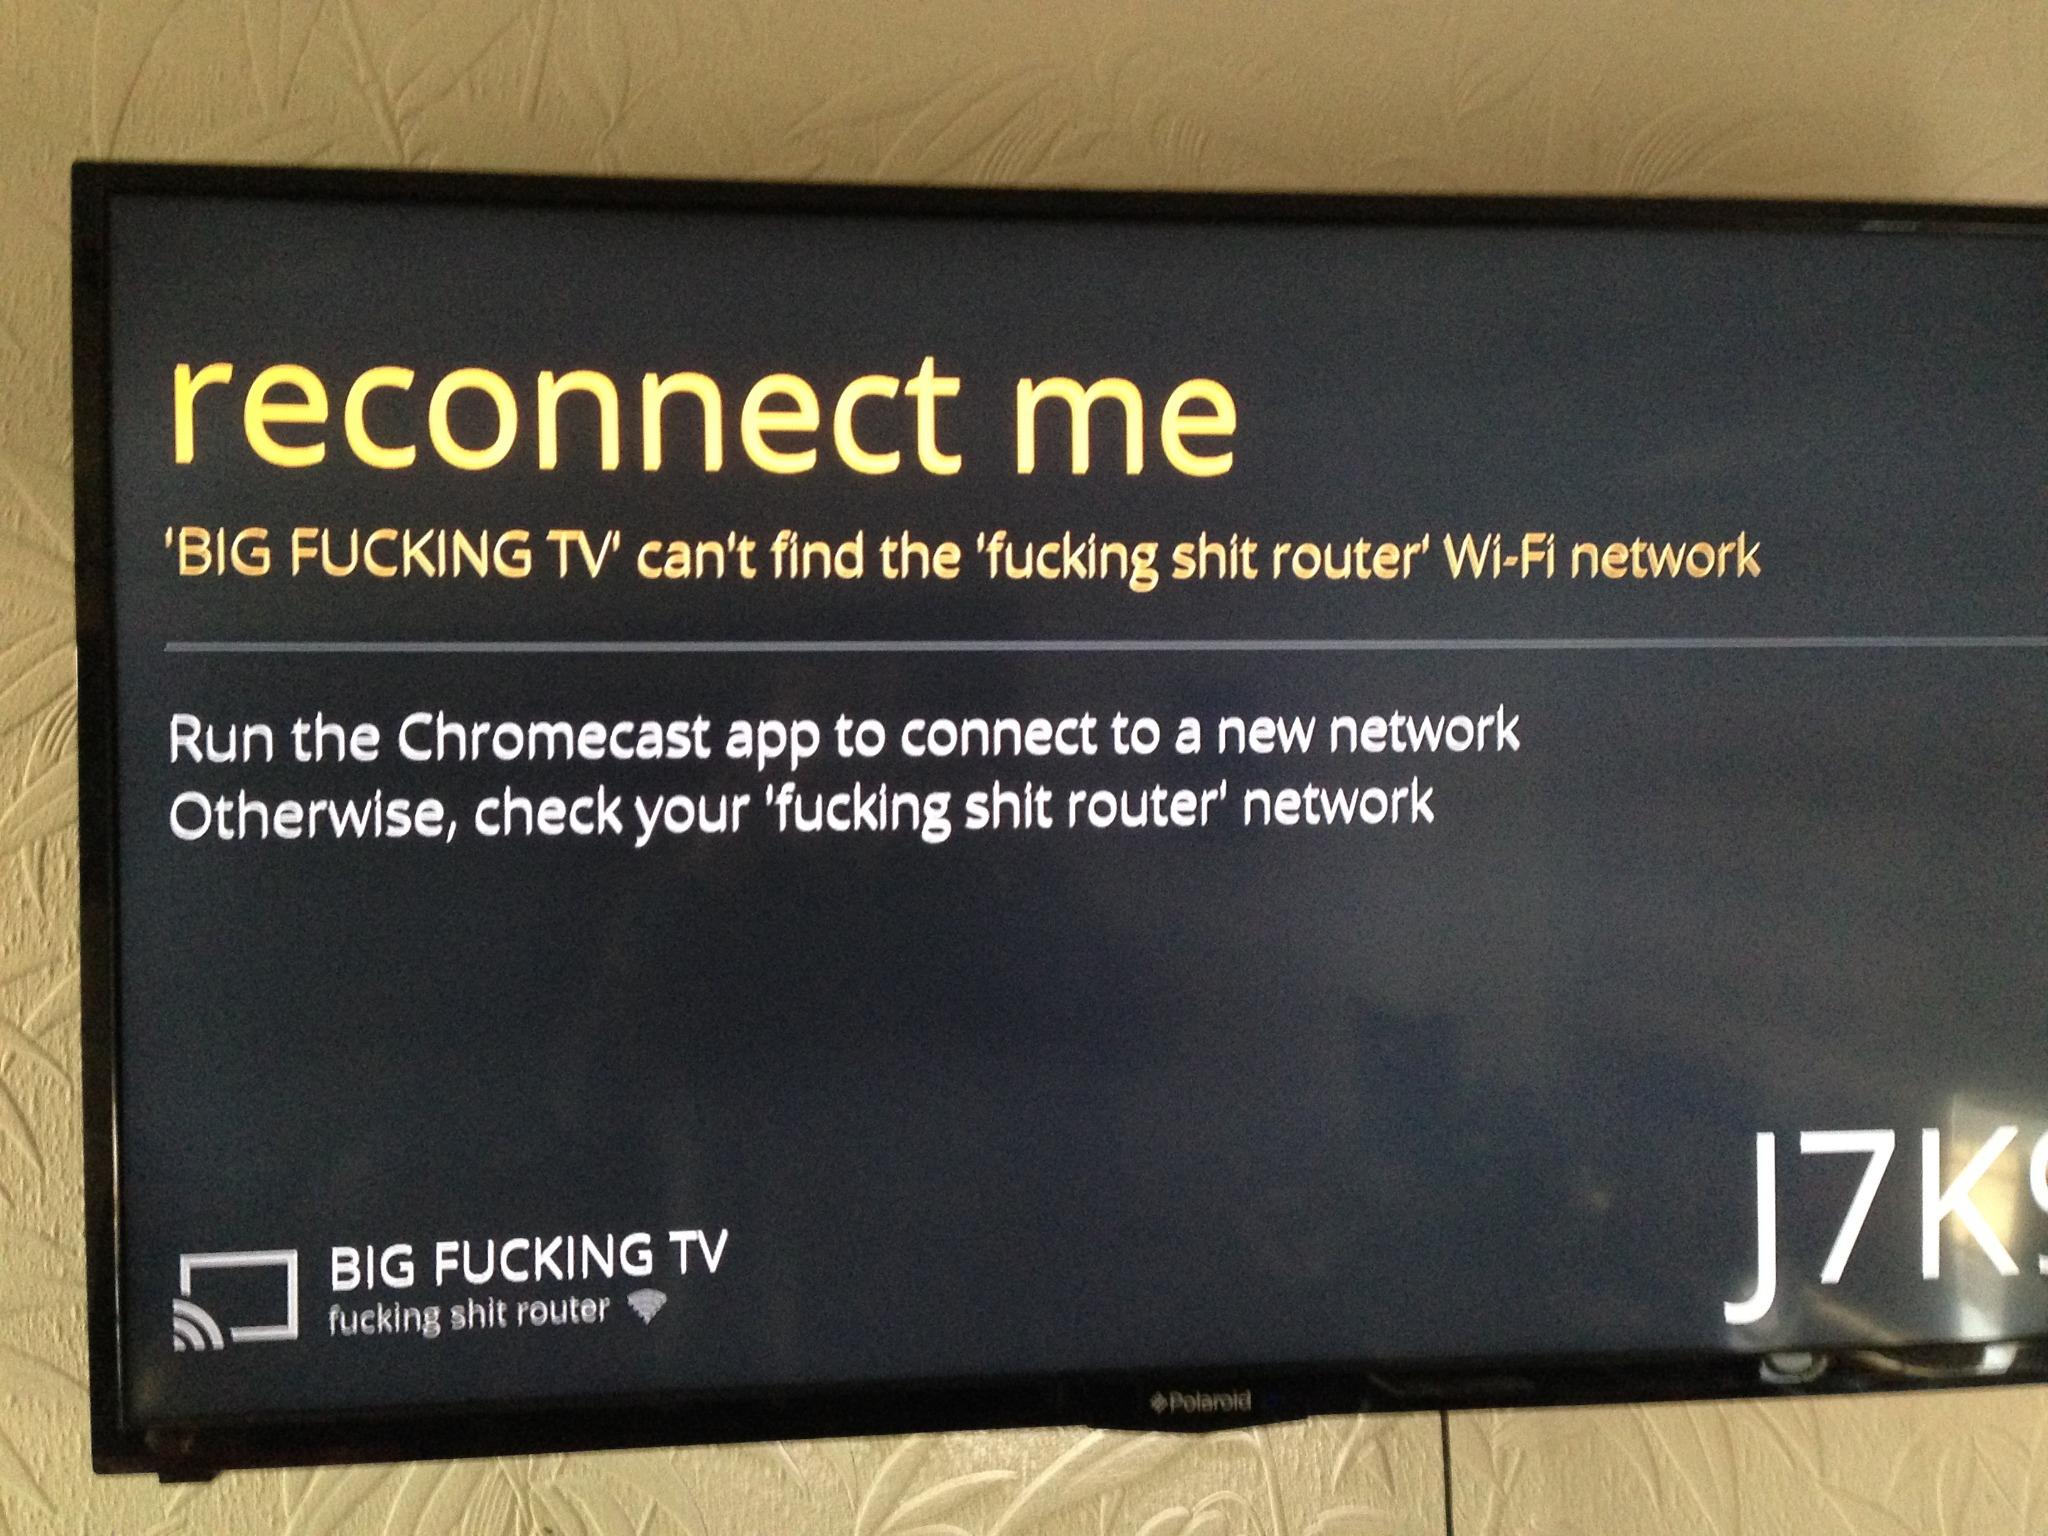 Reconnect me